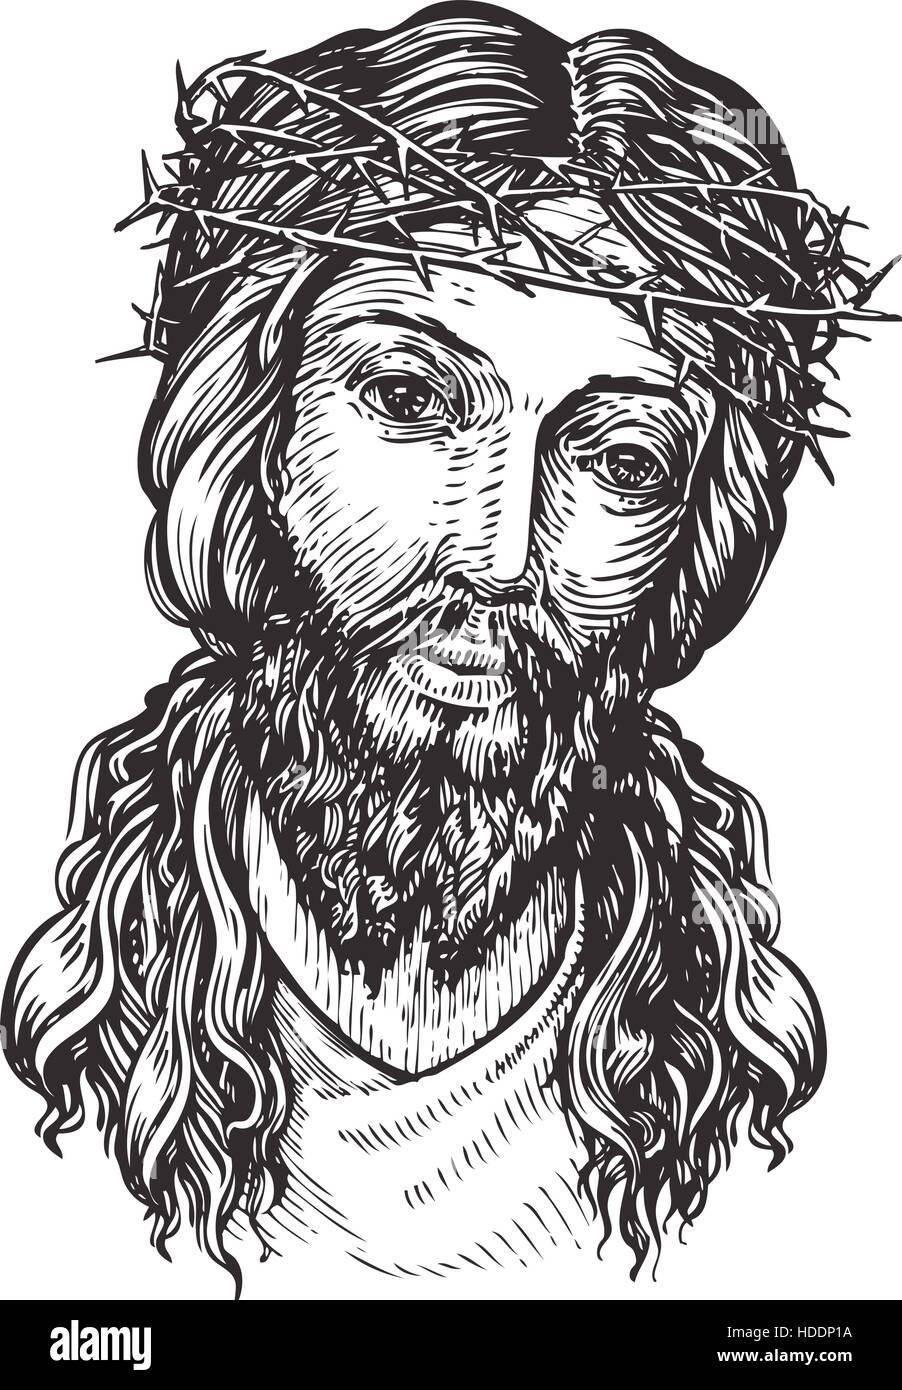 Jesus Christ with thorny wreath on his head. Sketch vector illustration Stock Vector